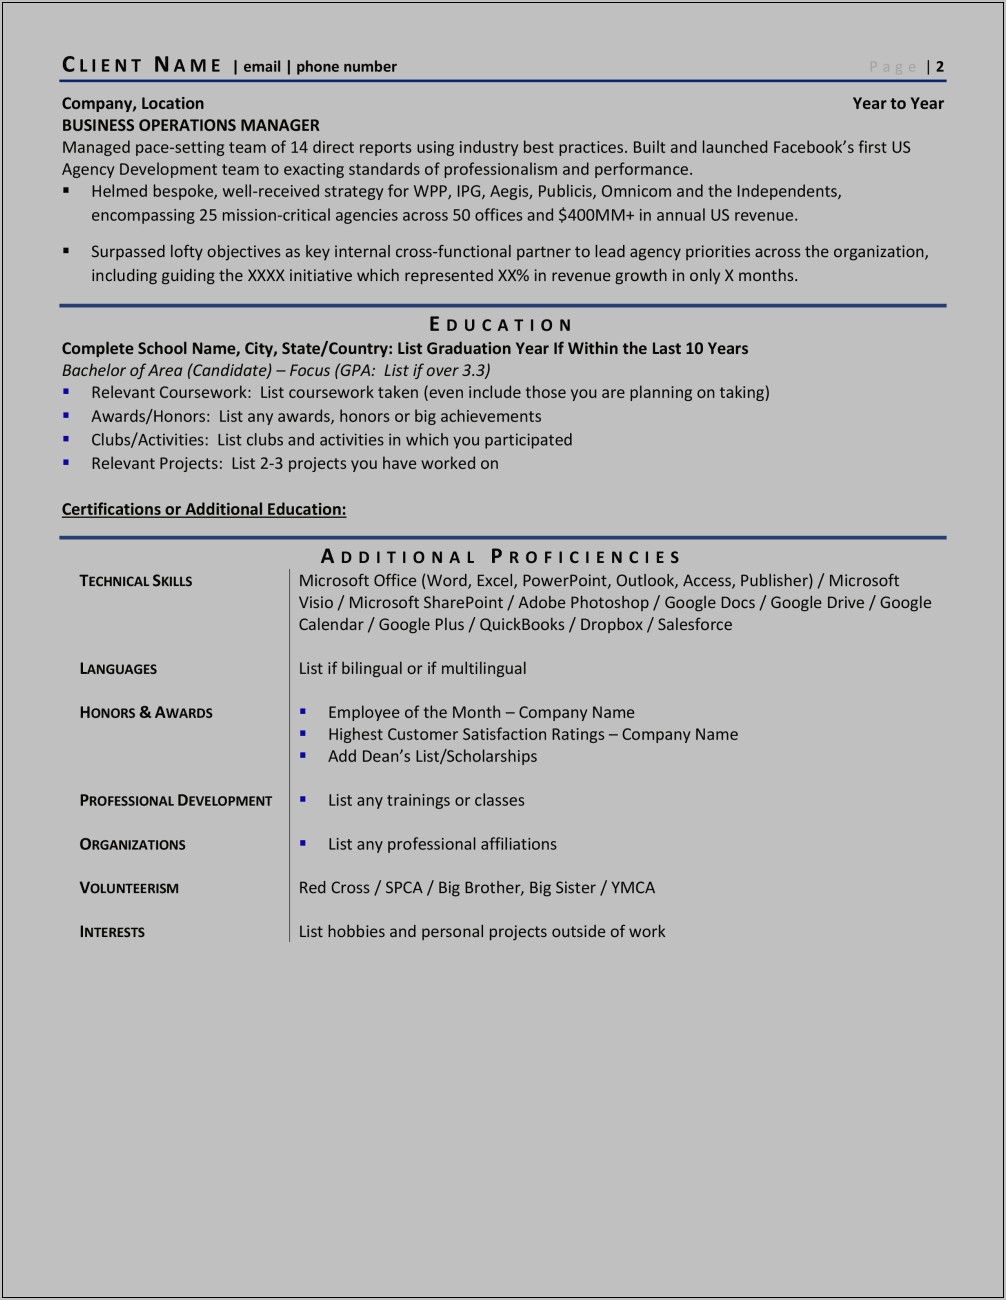 Chief Sales Officer Resume Example